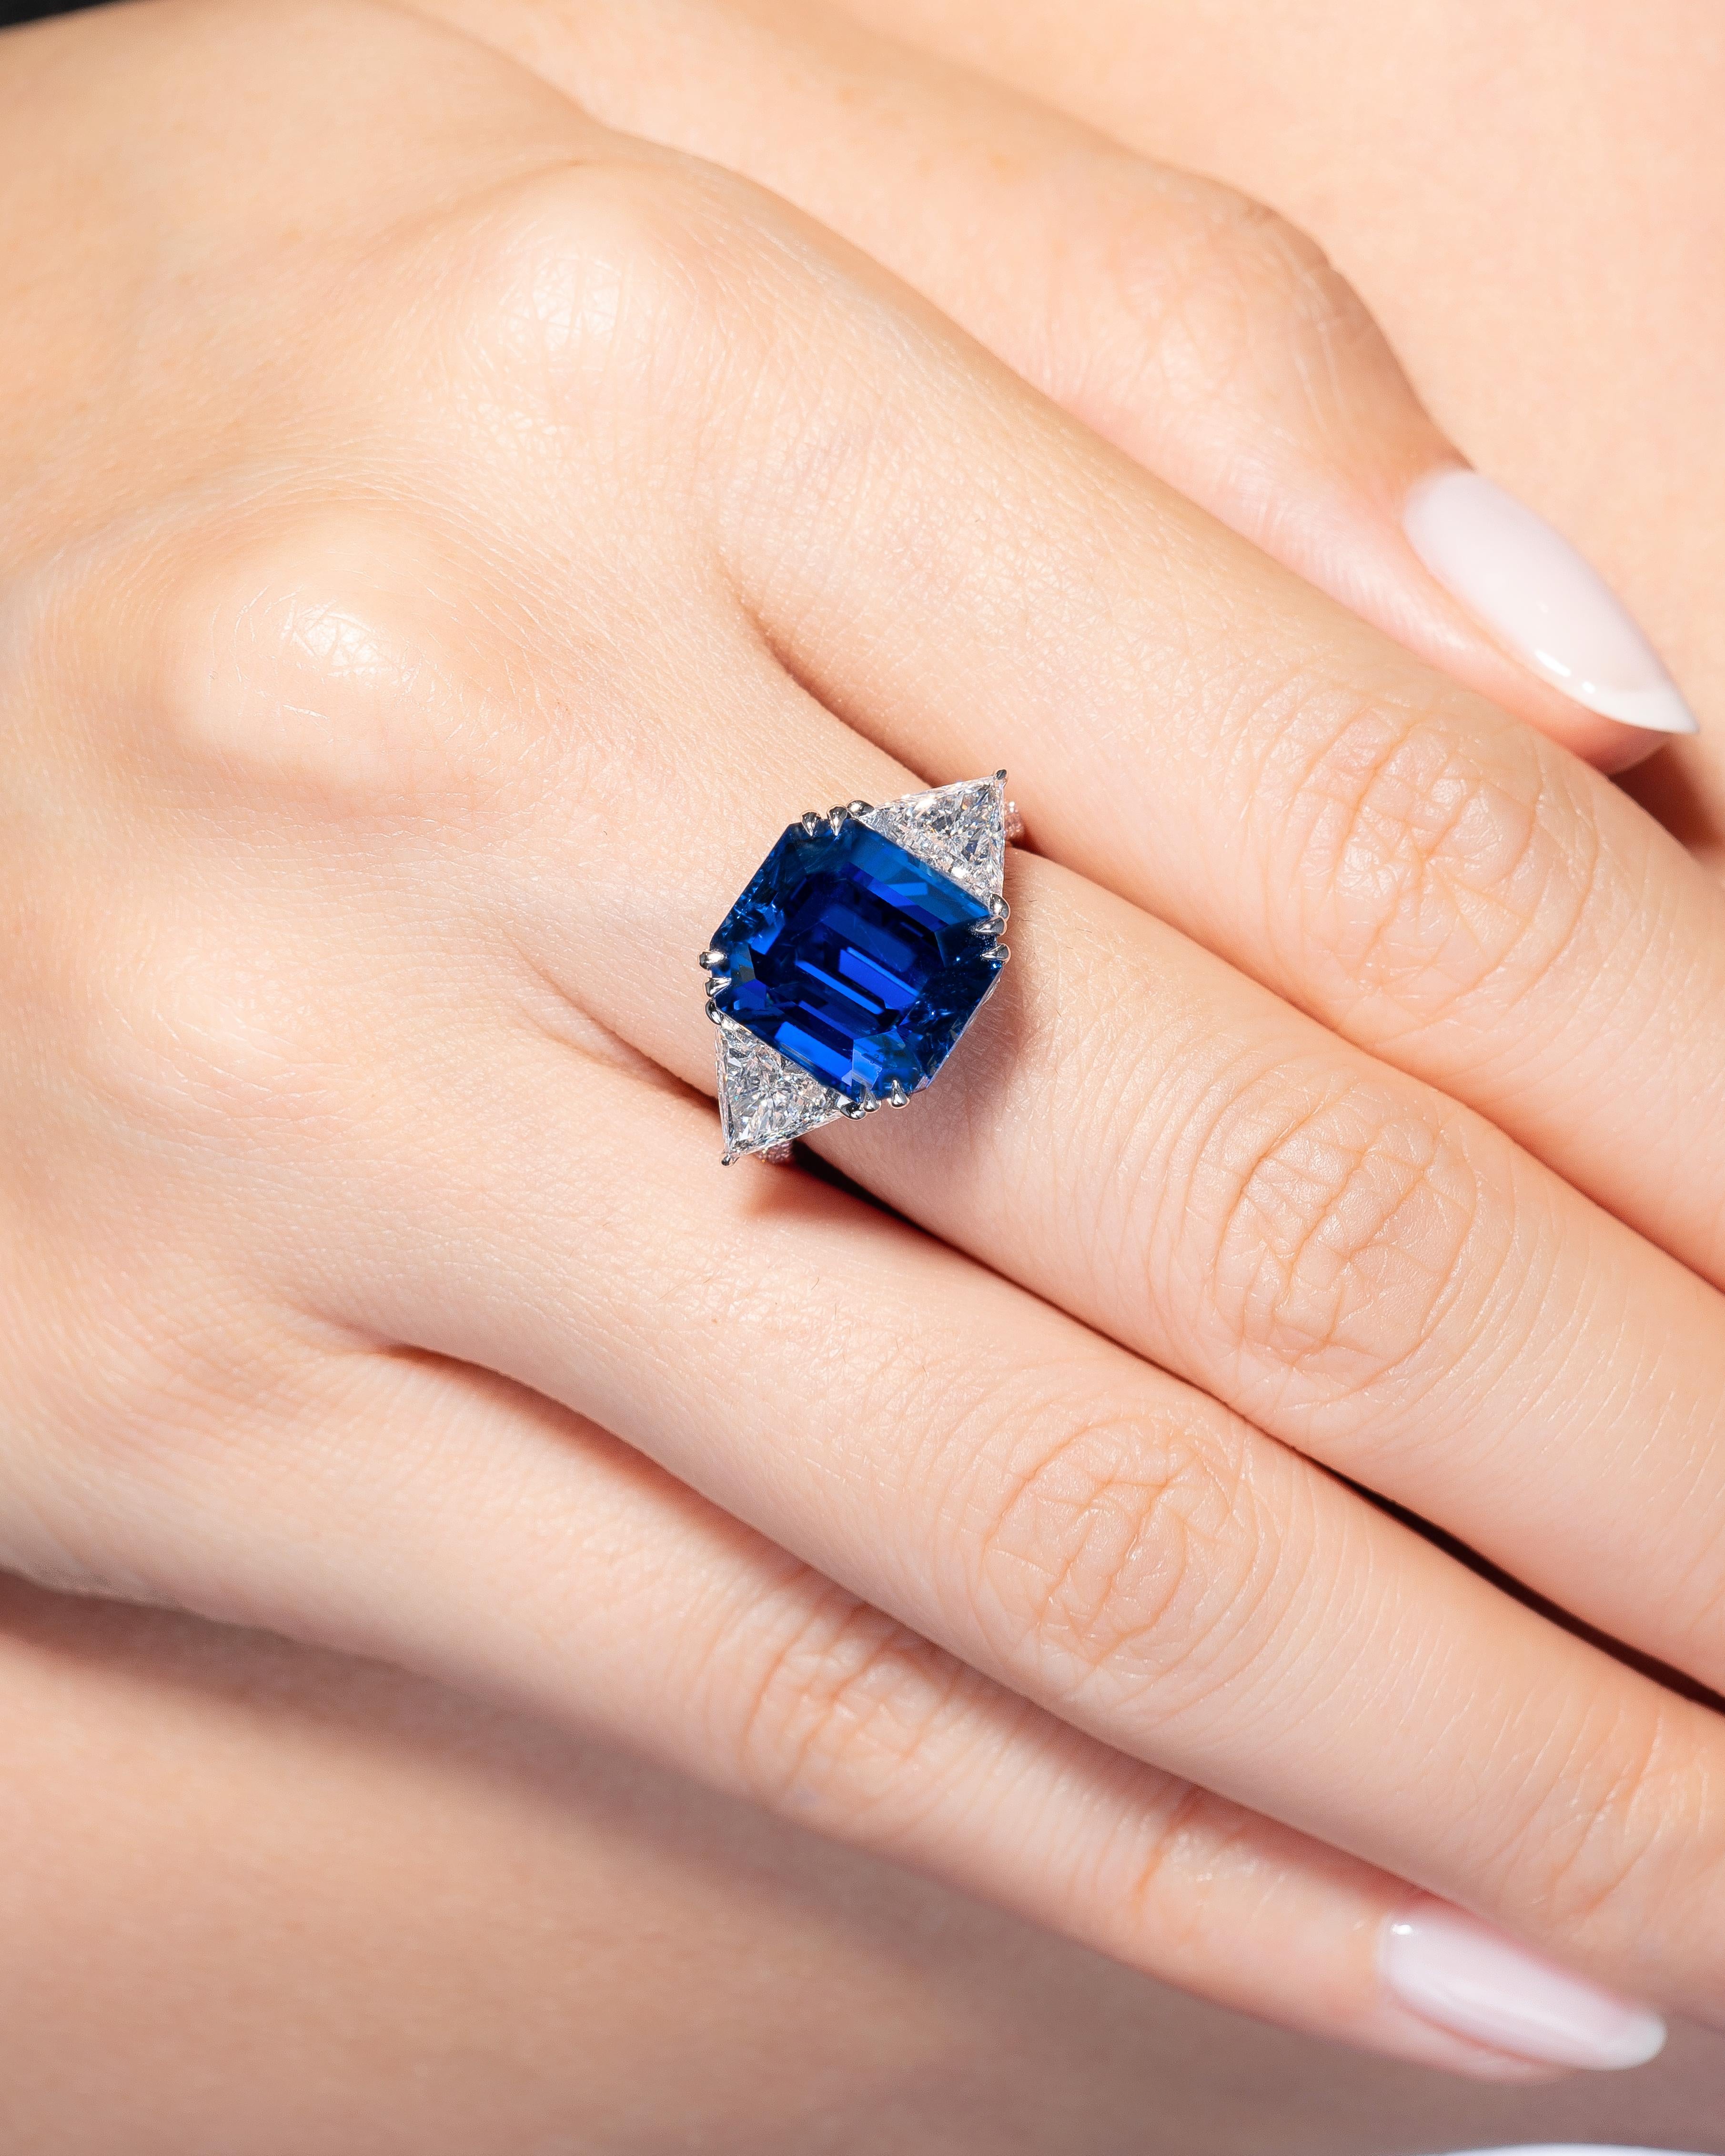 An exceptional 10.05 carat Burmese No-Heat Sapphire in an octagonal shape that has been certified by Gubelin. The certificate state that the sapphire is of natural corundum with no indication of artificial heating. The sapphire is surrounded by 2